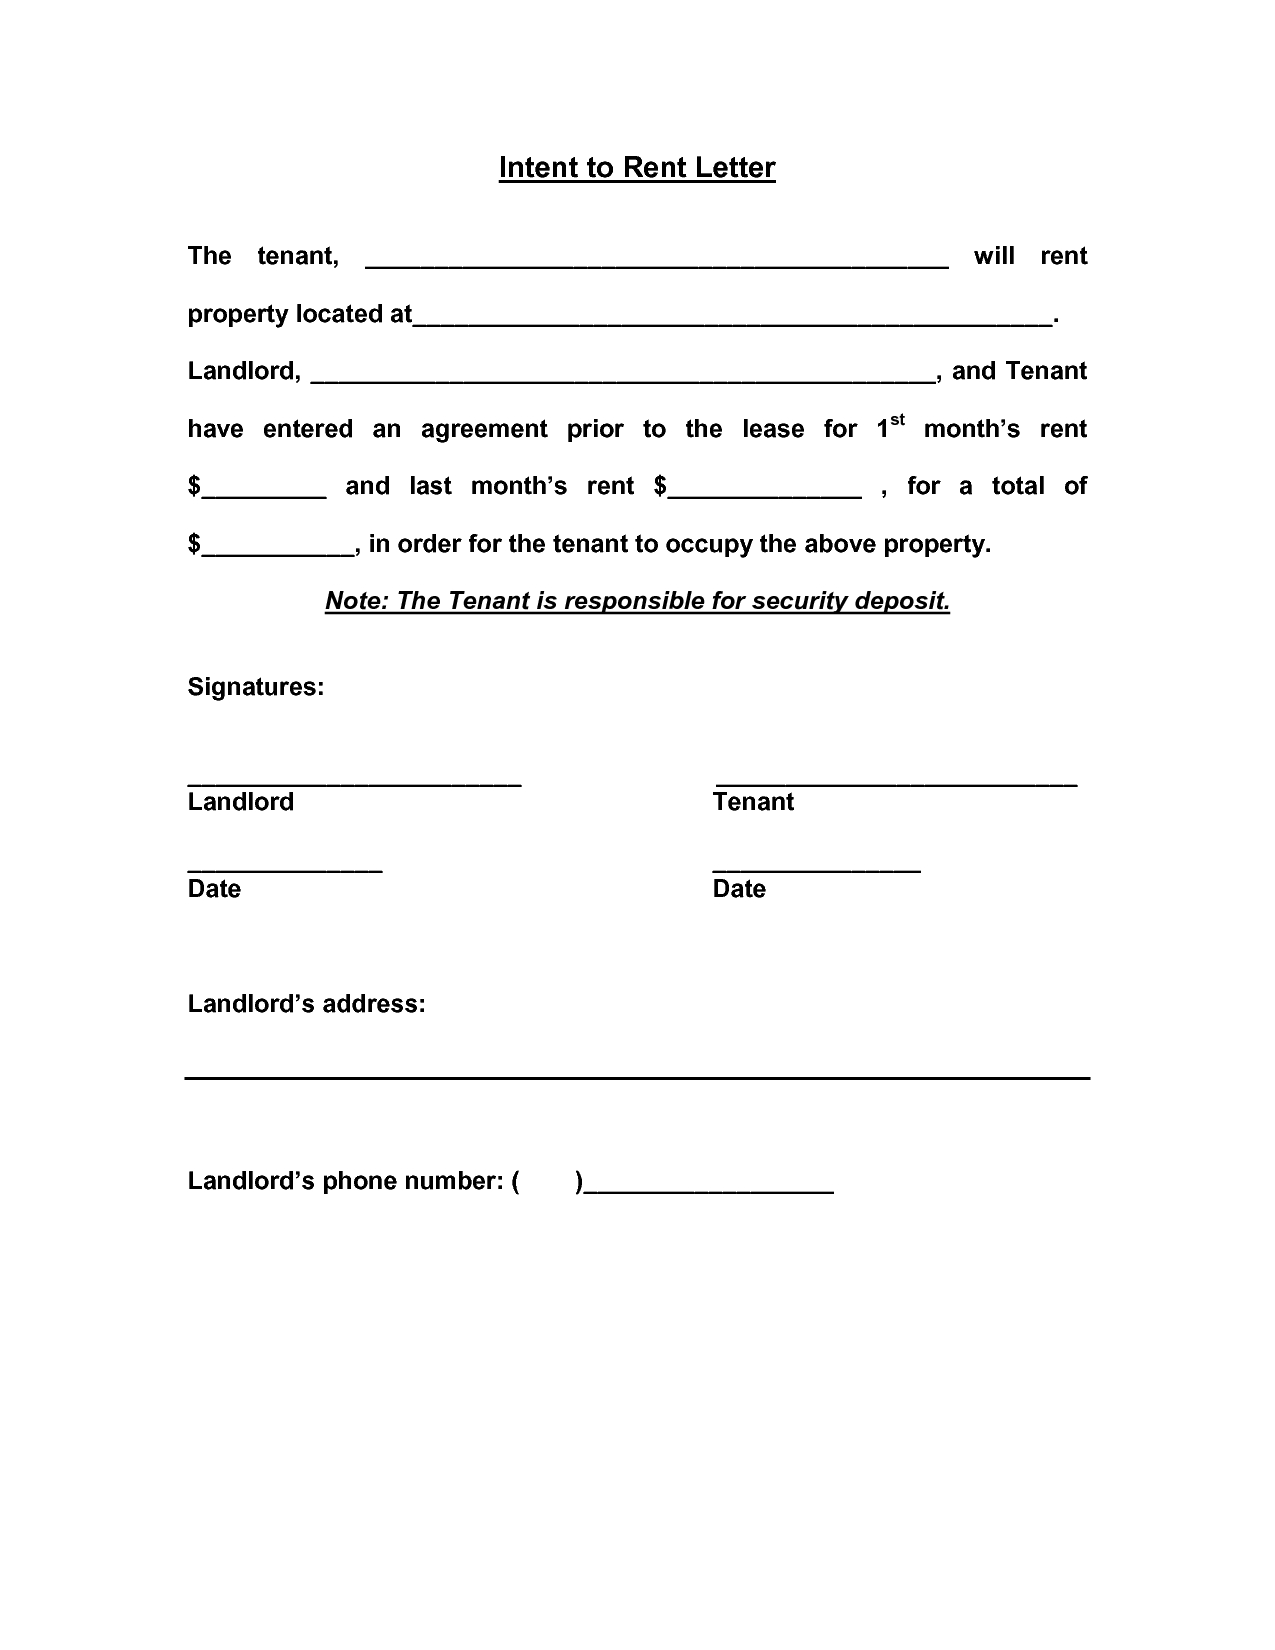 letter-of-intent-to-lease-commercial-property-template-examples